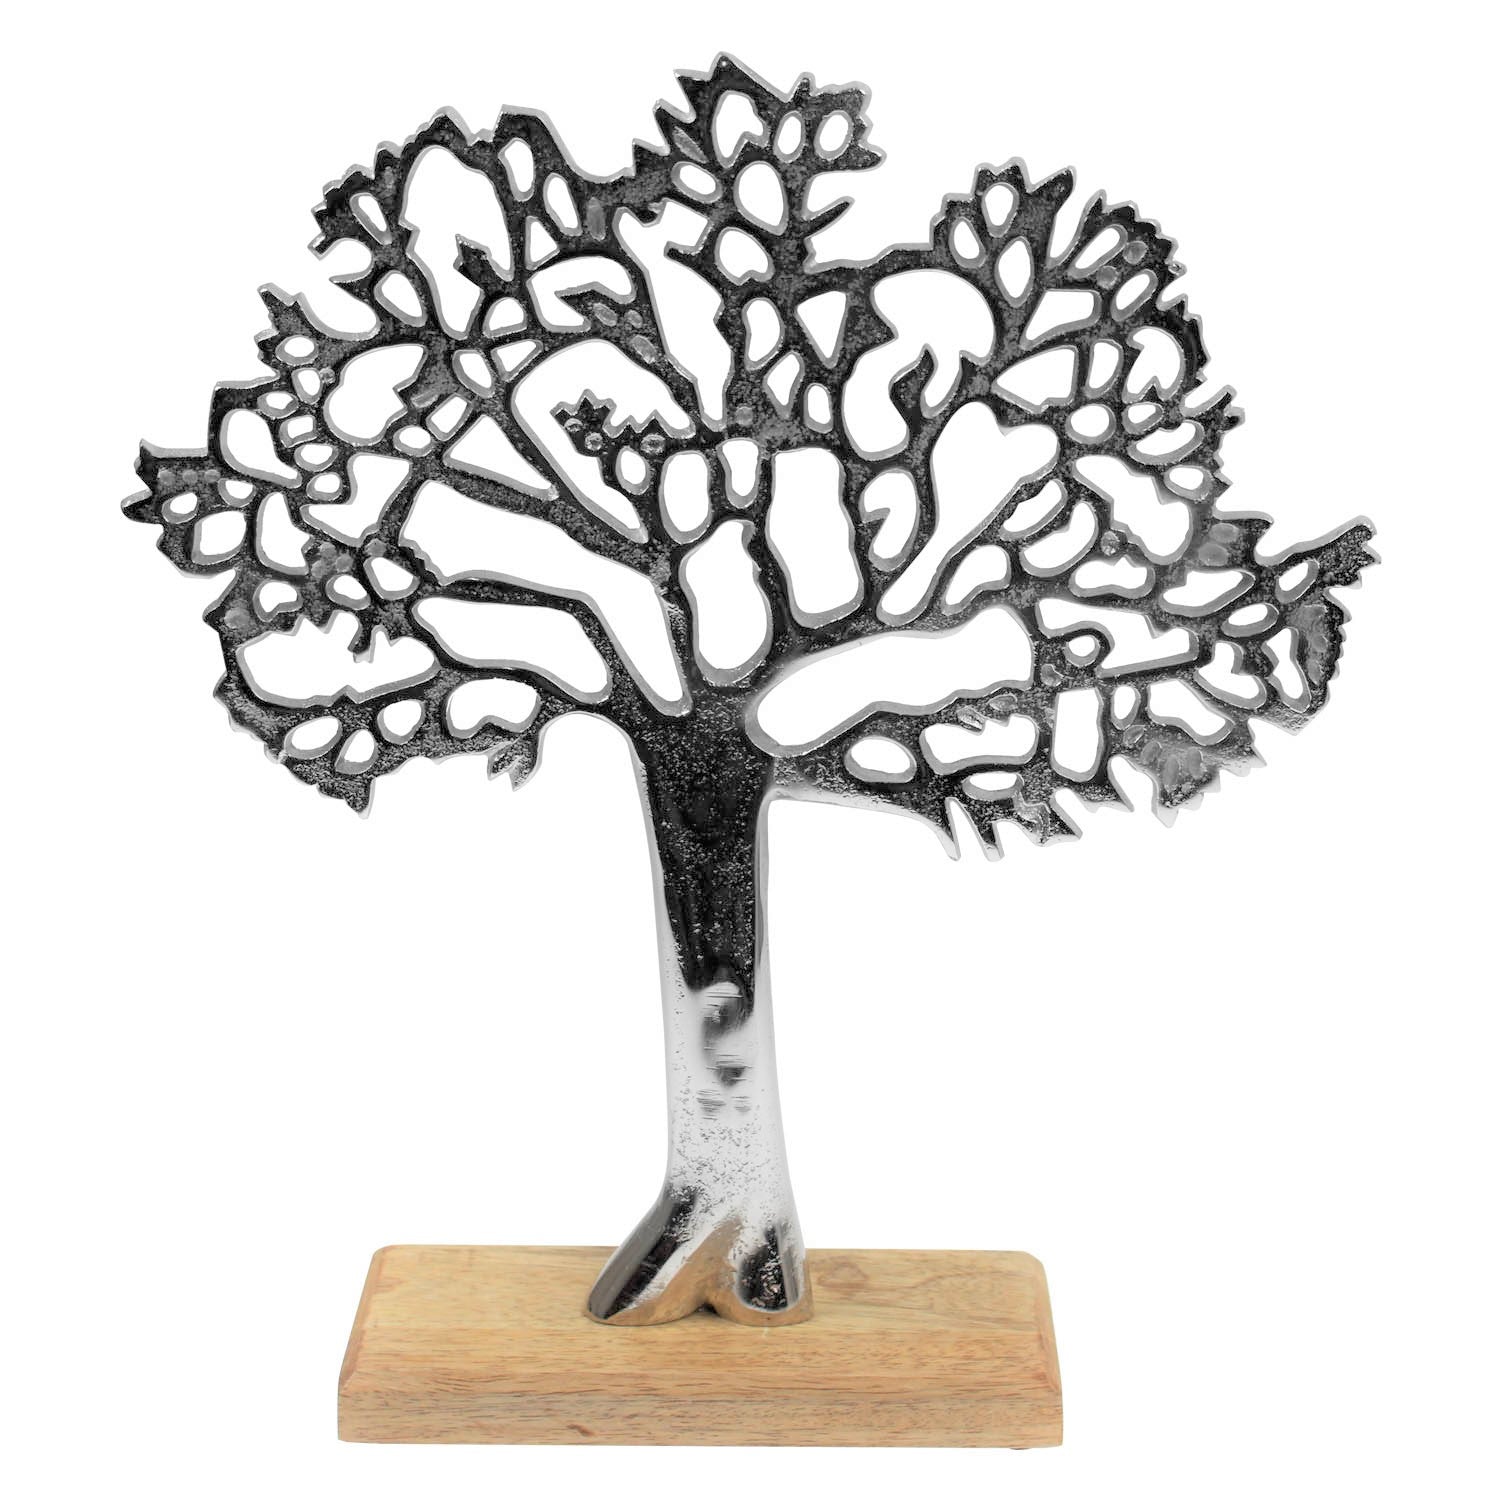 Silver Tree On Wooden Base Ornament Sculpture Display Decor